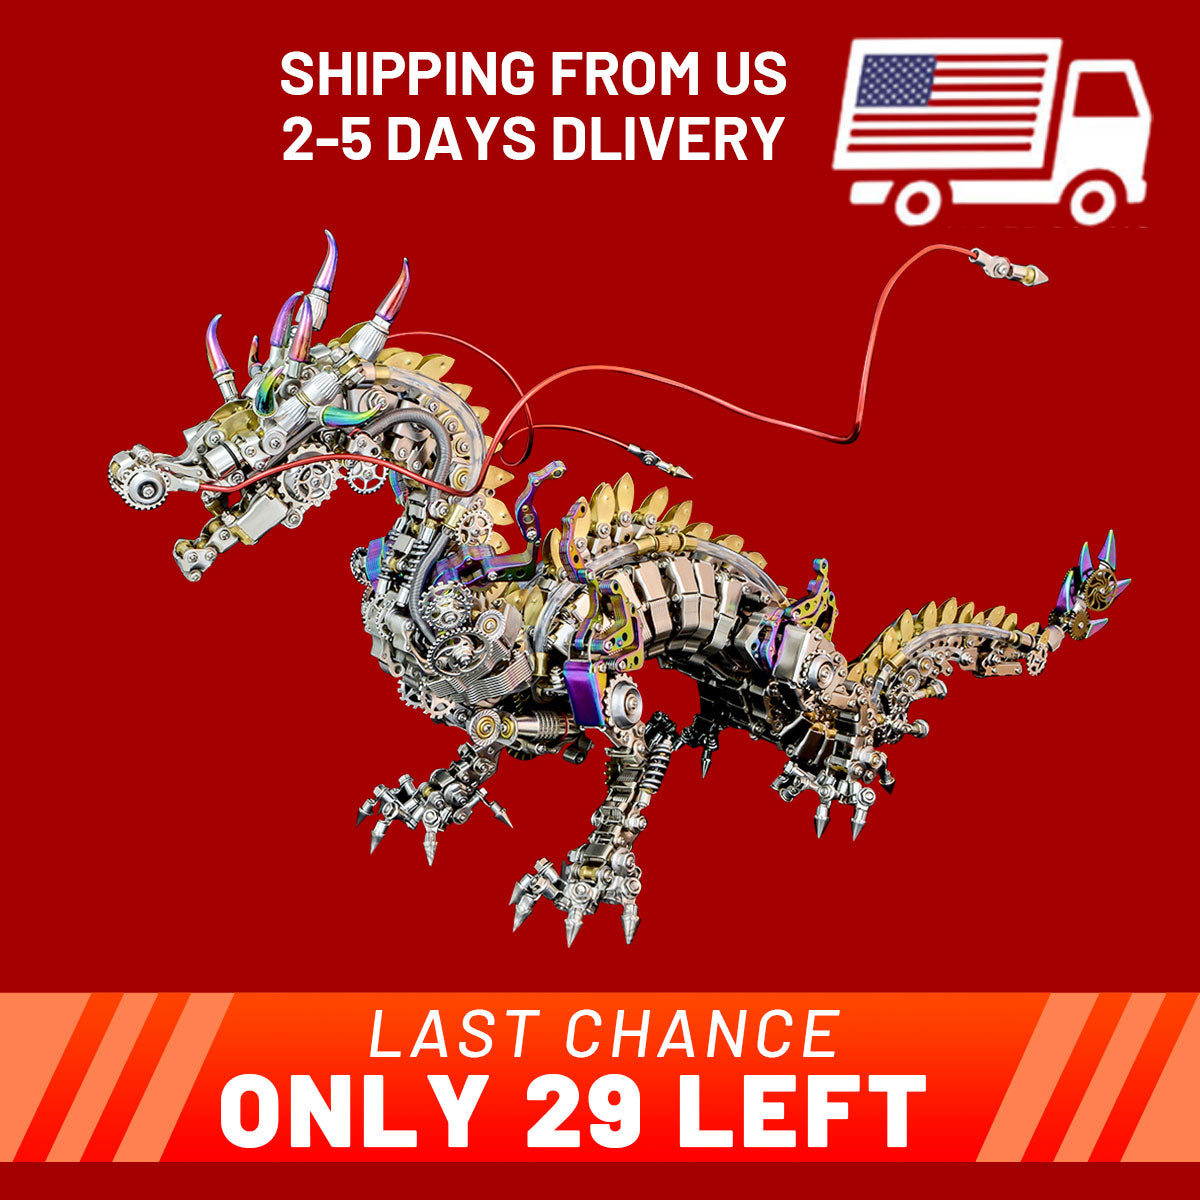 dragon-model-shipping from-usa-directly-christmas-stirlingkit-official-website (1).jpg__PID:2e16b136-5e66-49bd-801e-8c64d4aaa3a5